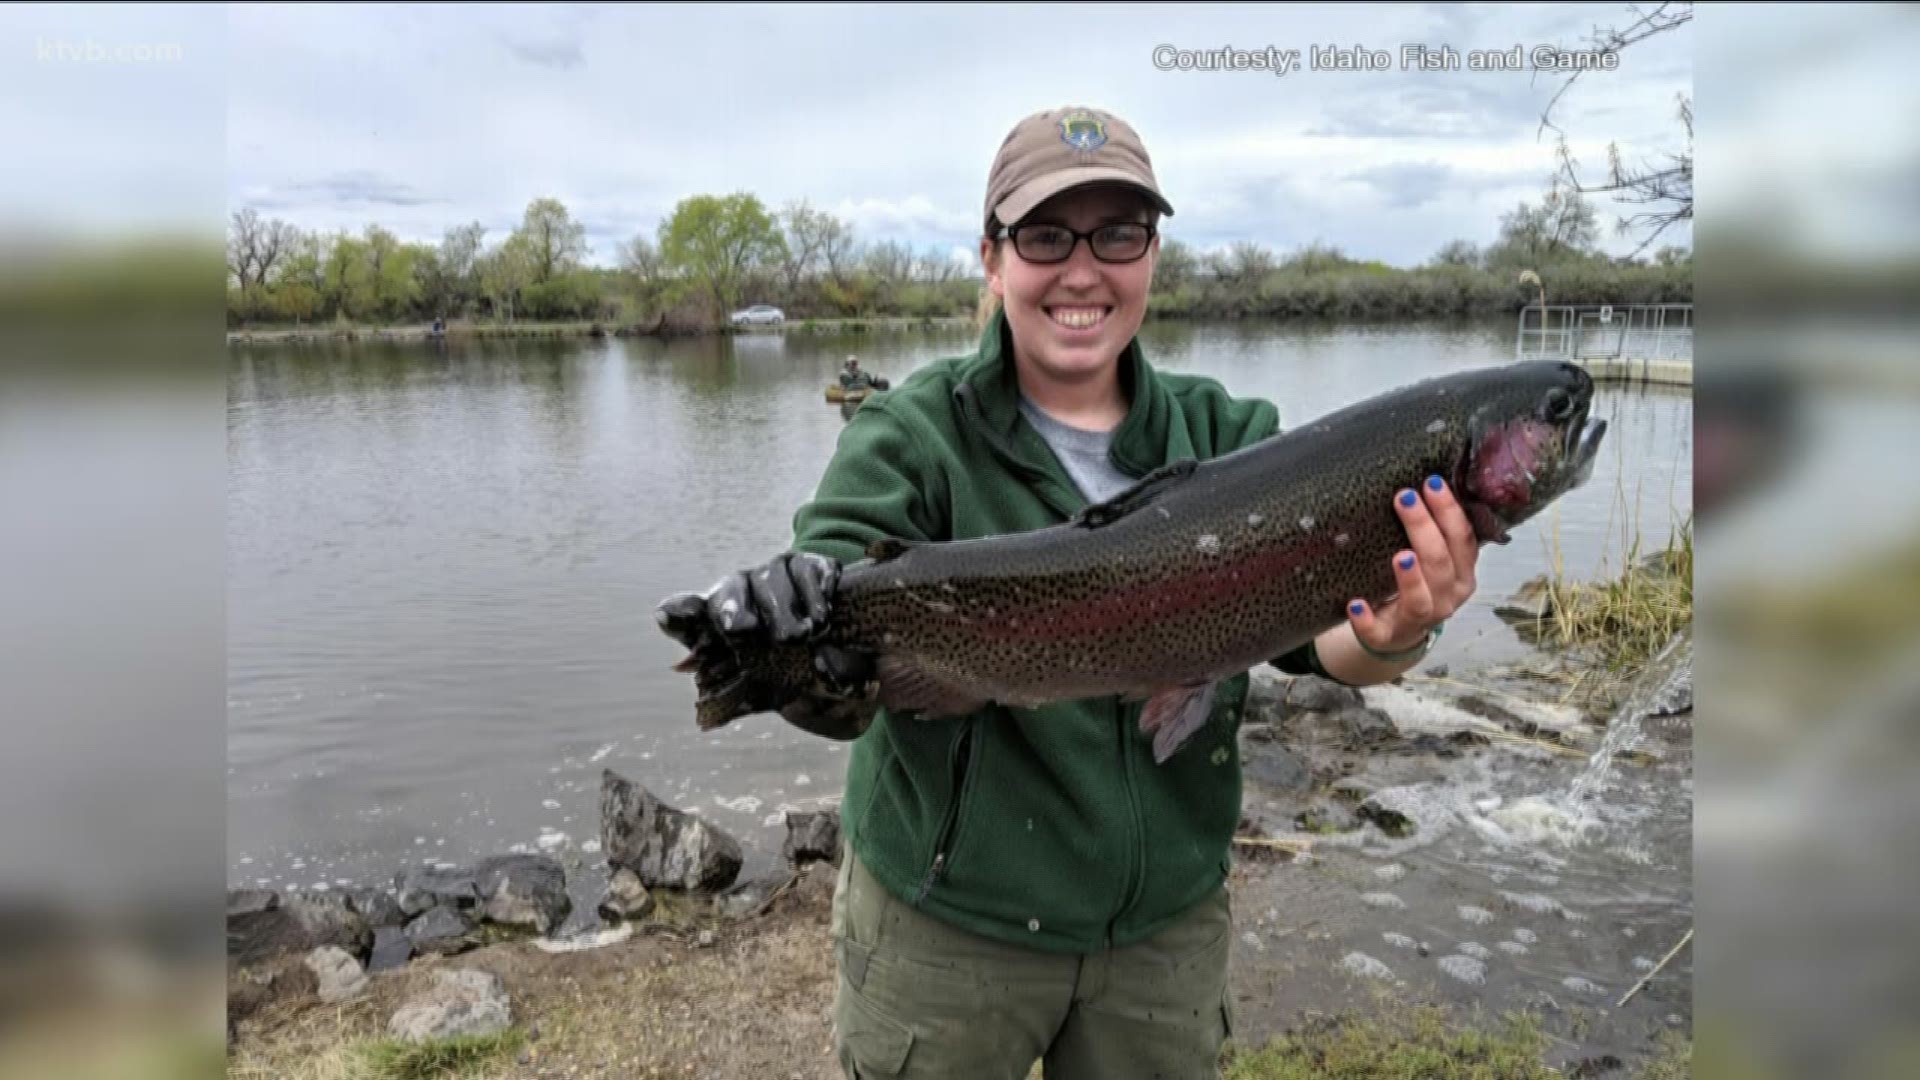 Idaho Fish and Game has been stocking local ponds with some big rainbow trout.